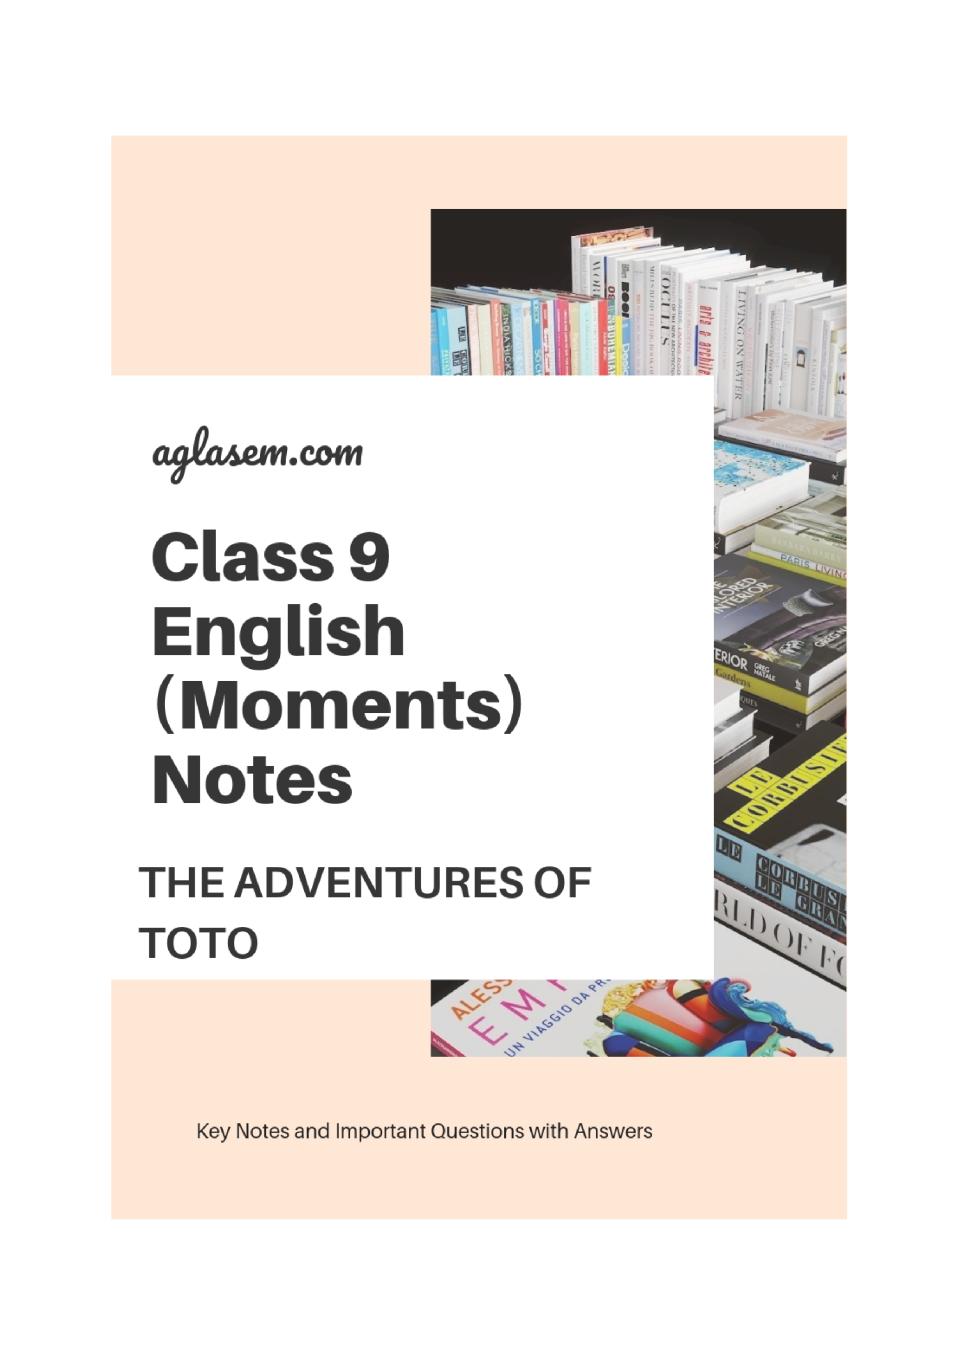 Class 9 English Moments Notes For The Adventures of Toto - Page 1